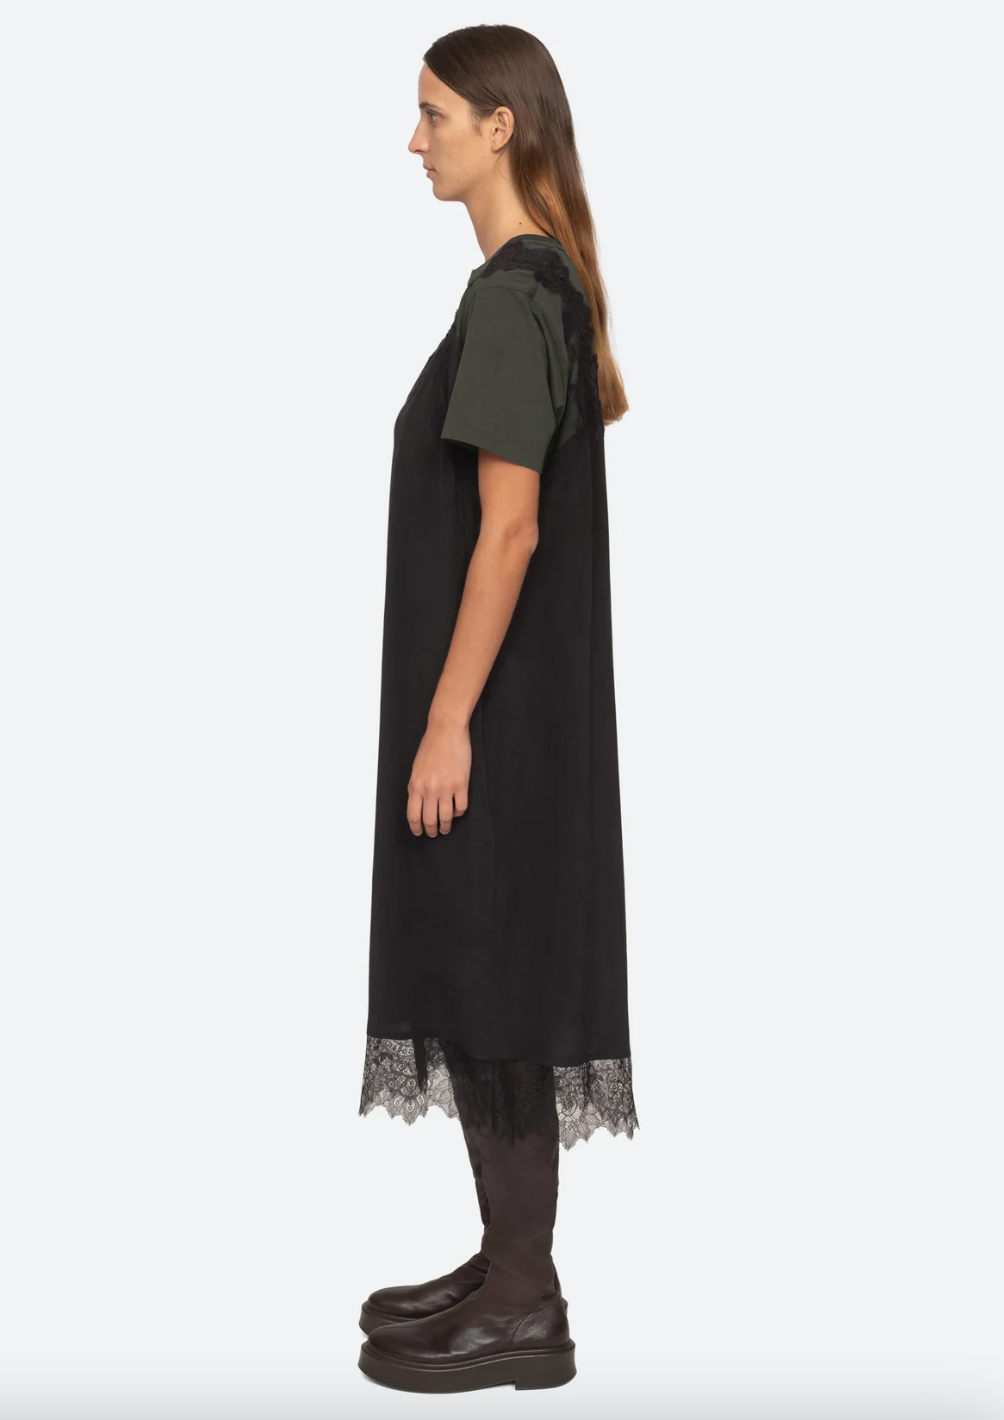 Product Image for Lorraine Combo Dress, Black